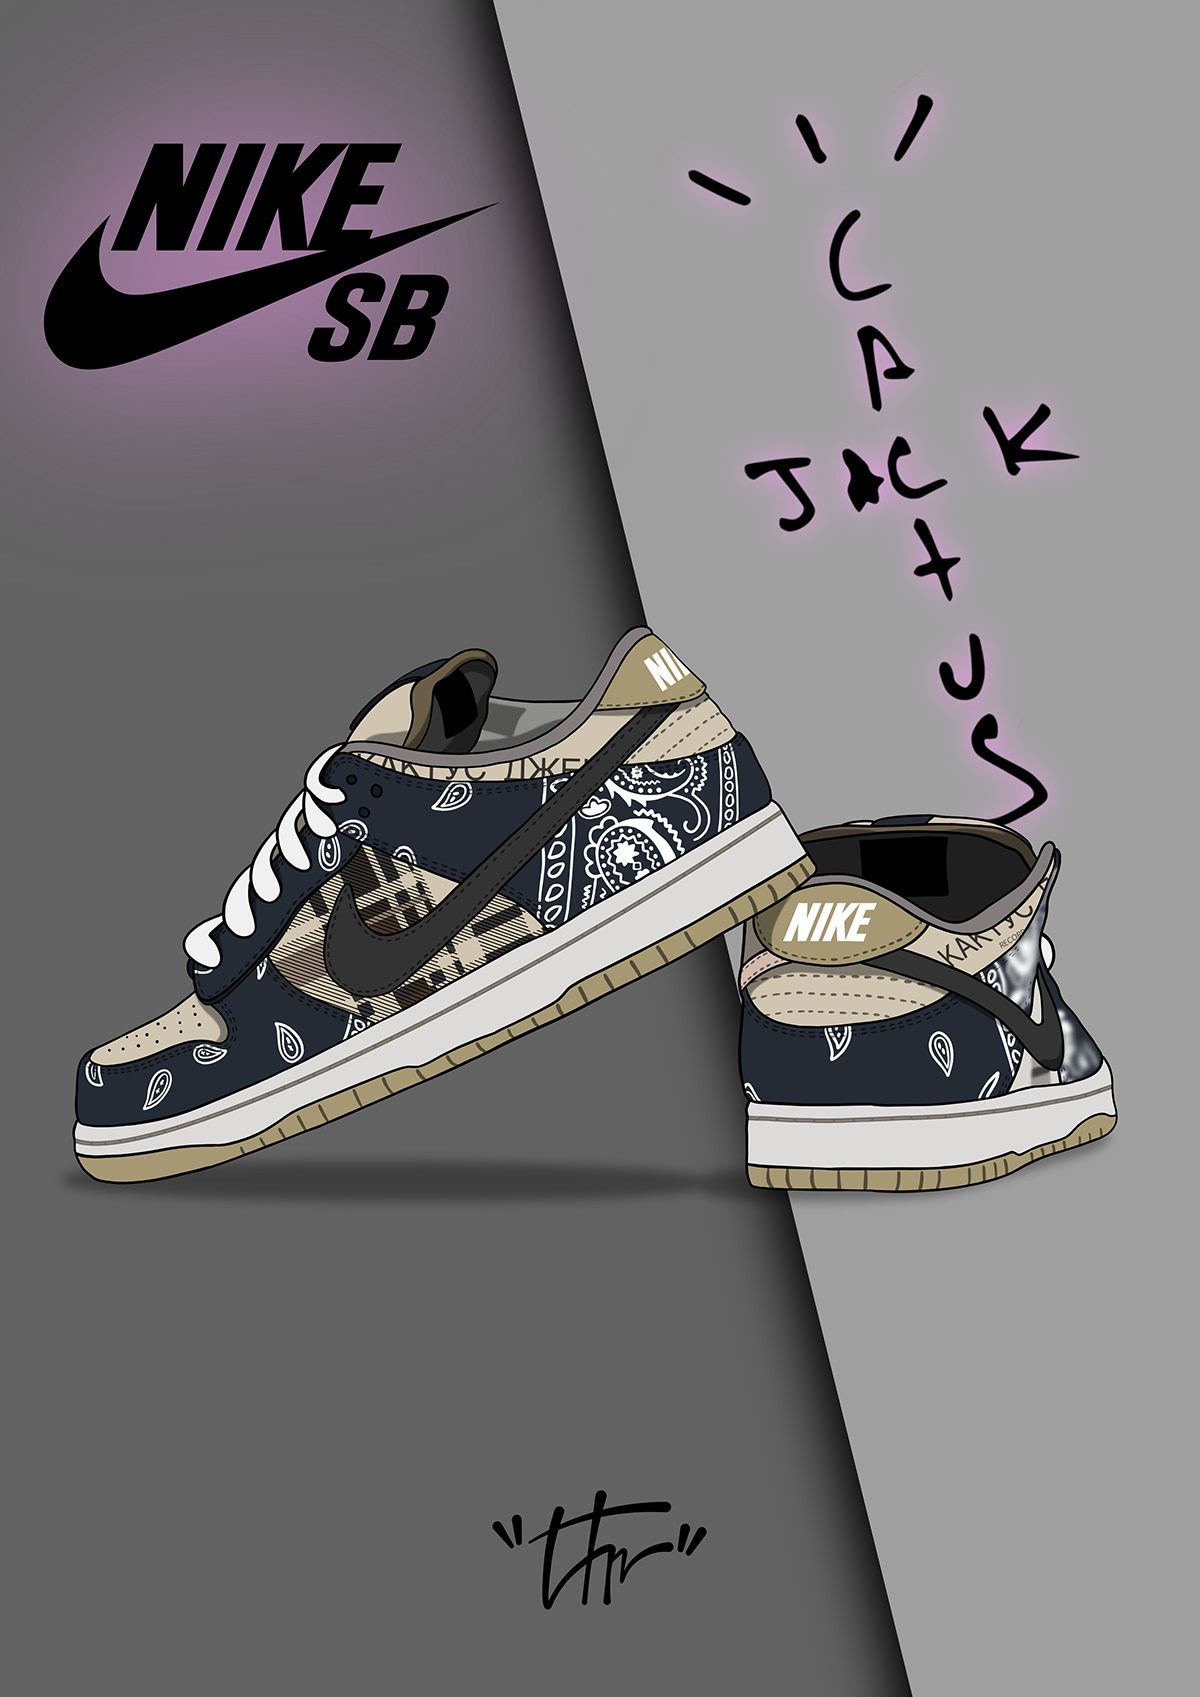 Nike wallpaper by Justie124  Download on ZEDGE  eb2e